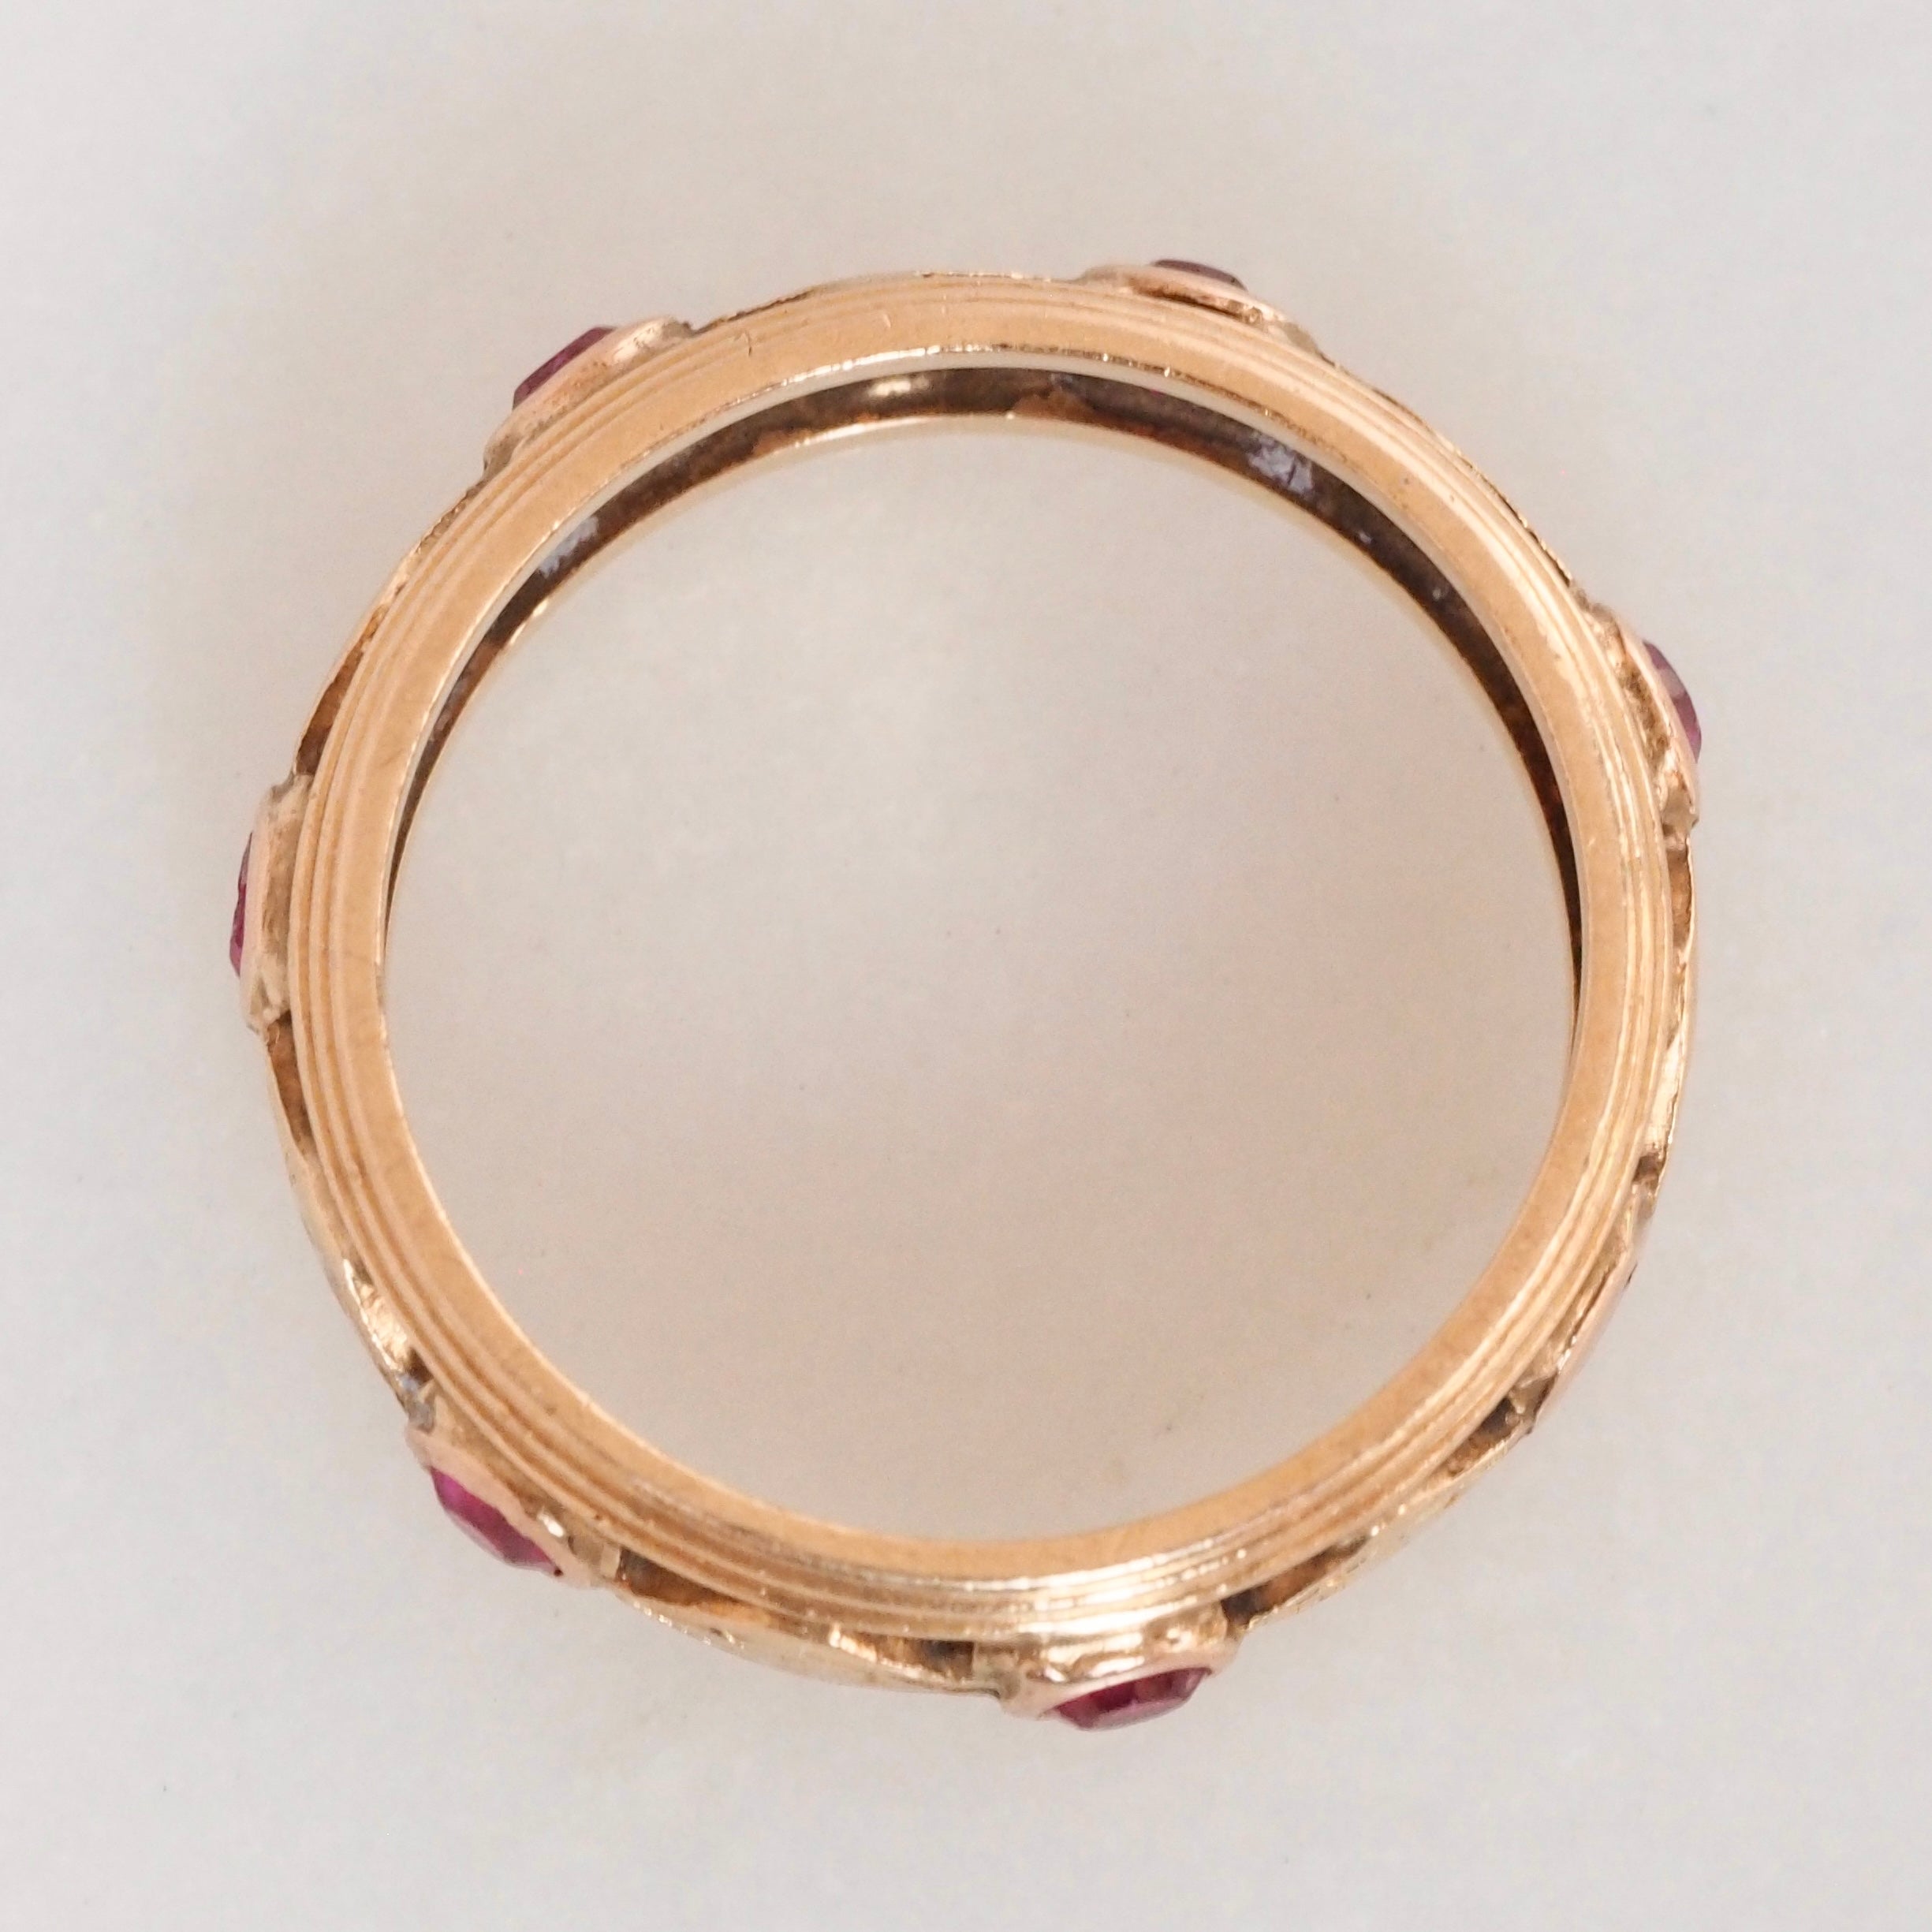 Antique 14k Gold Ruby Engraved Kite Cutout Band